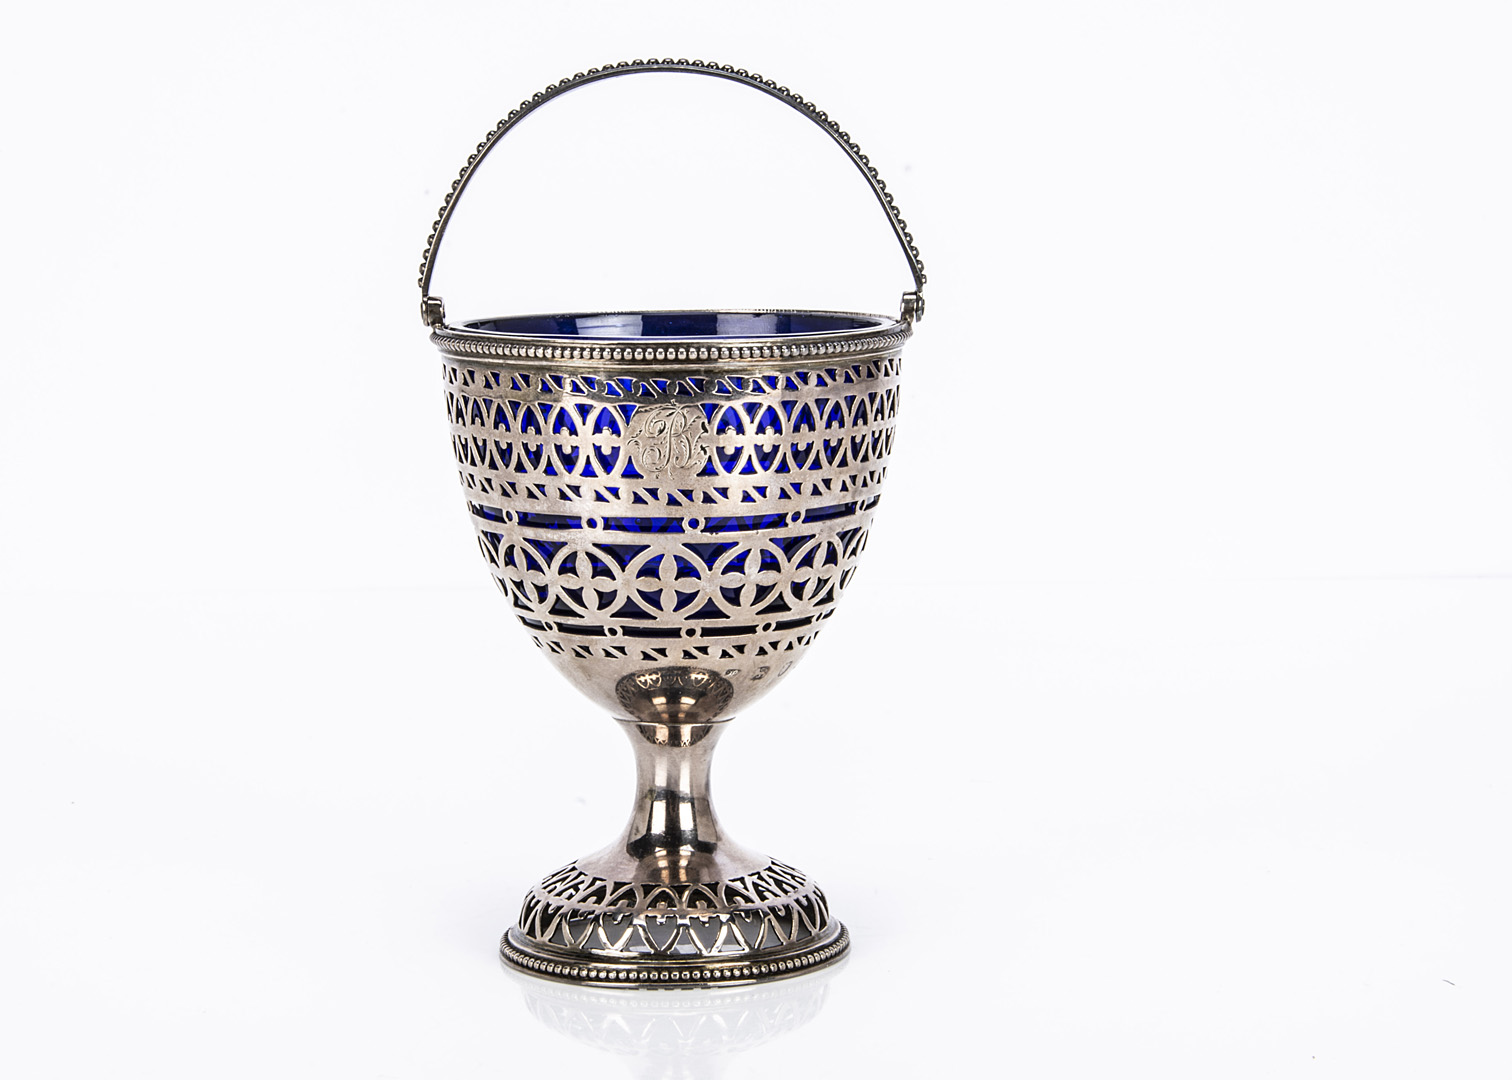 A George III silver pieced goblet possibly by Hester Bateman, 11cm high, 3.5 ozt, with engraved